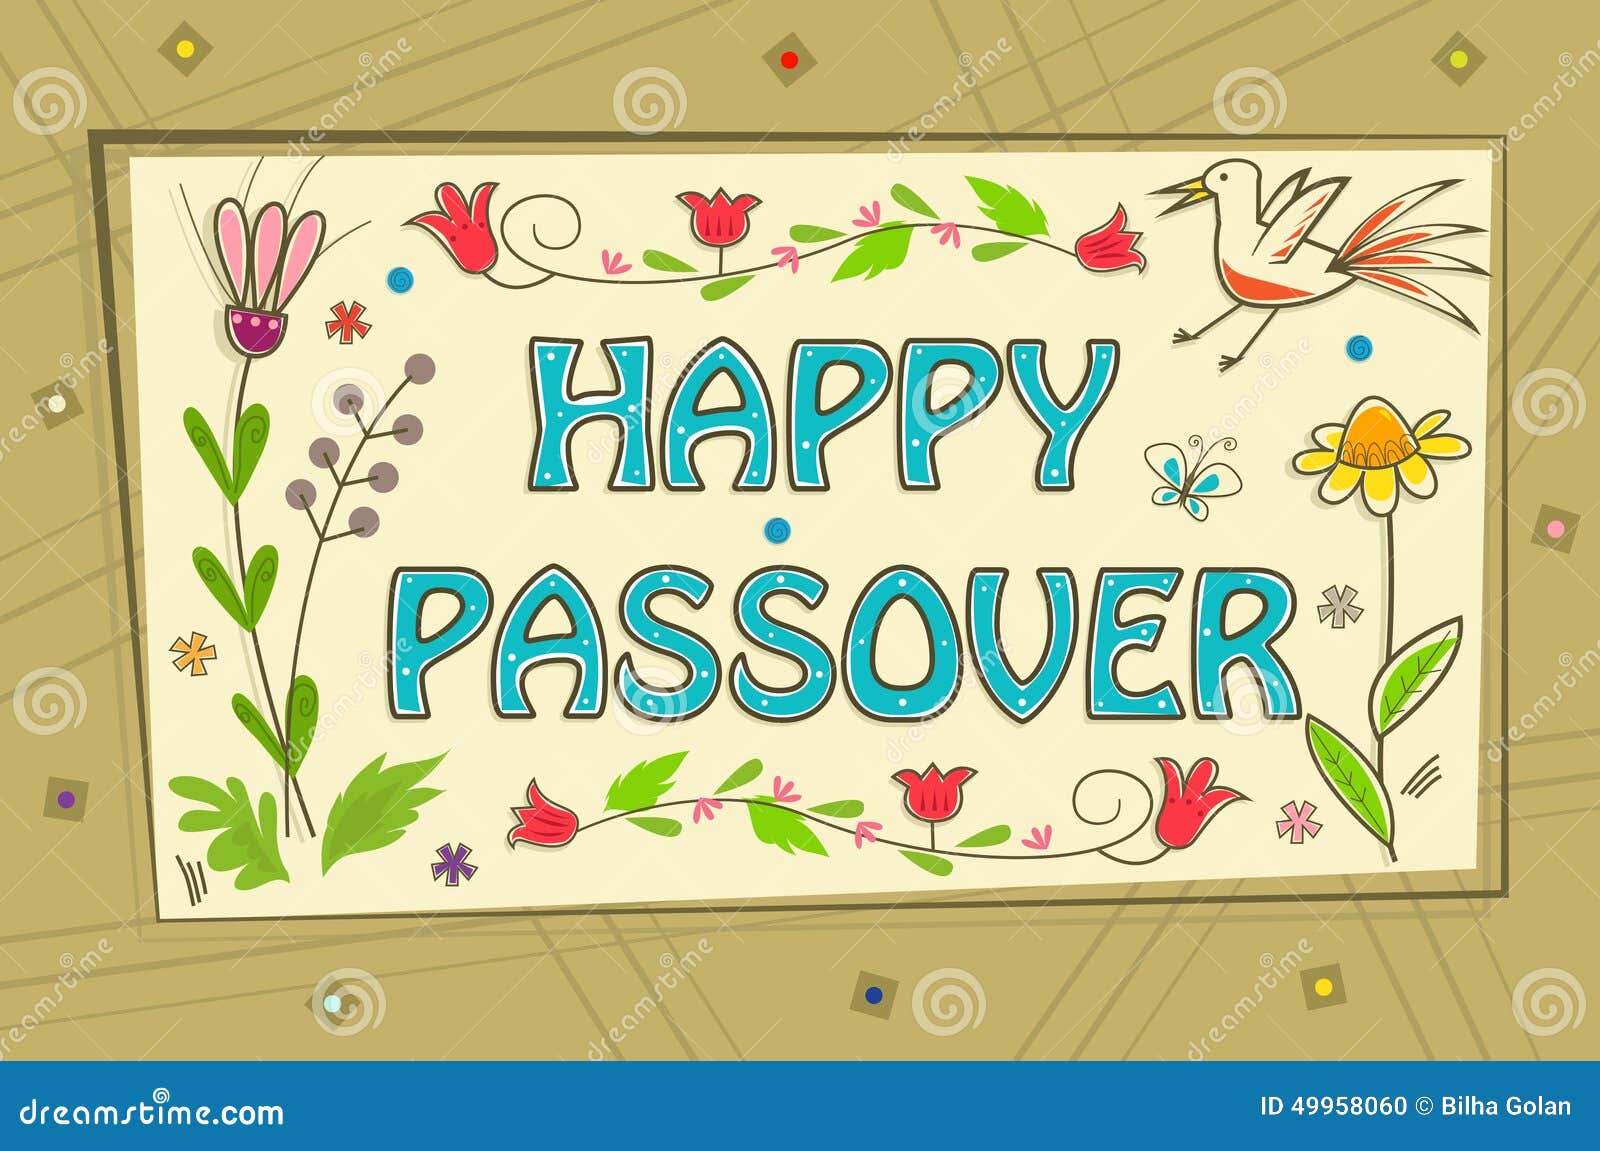 Passover Sign Stock Vector - Image: 49958060